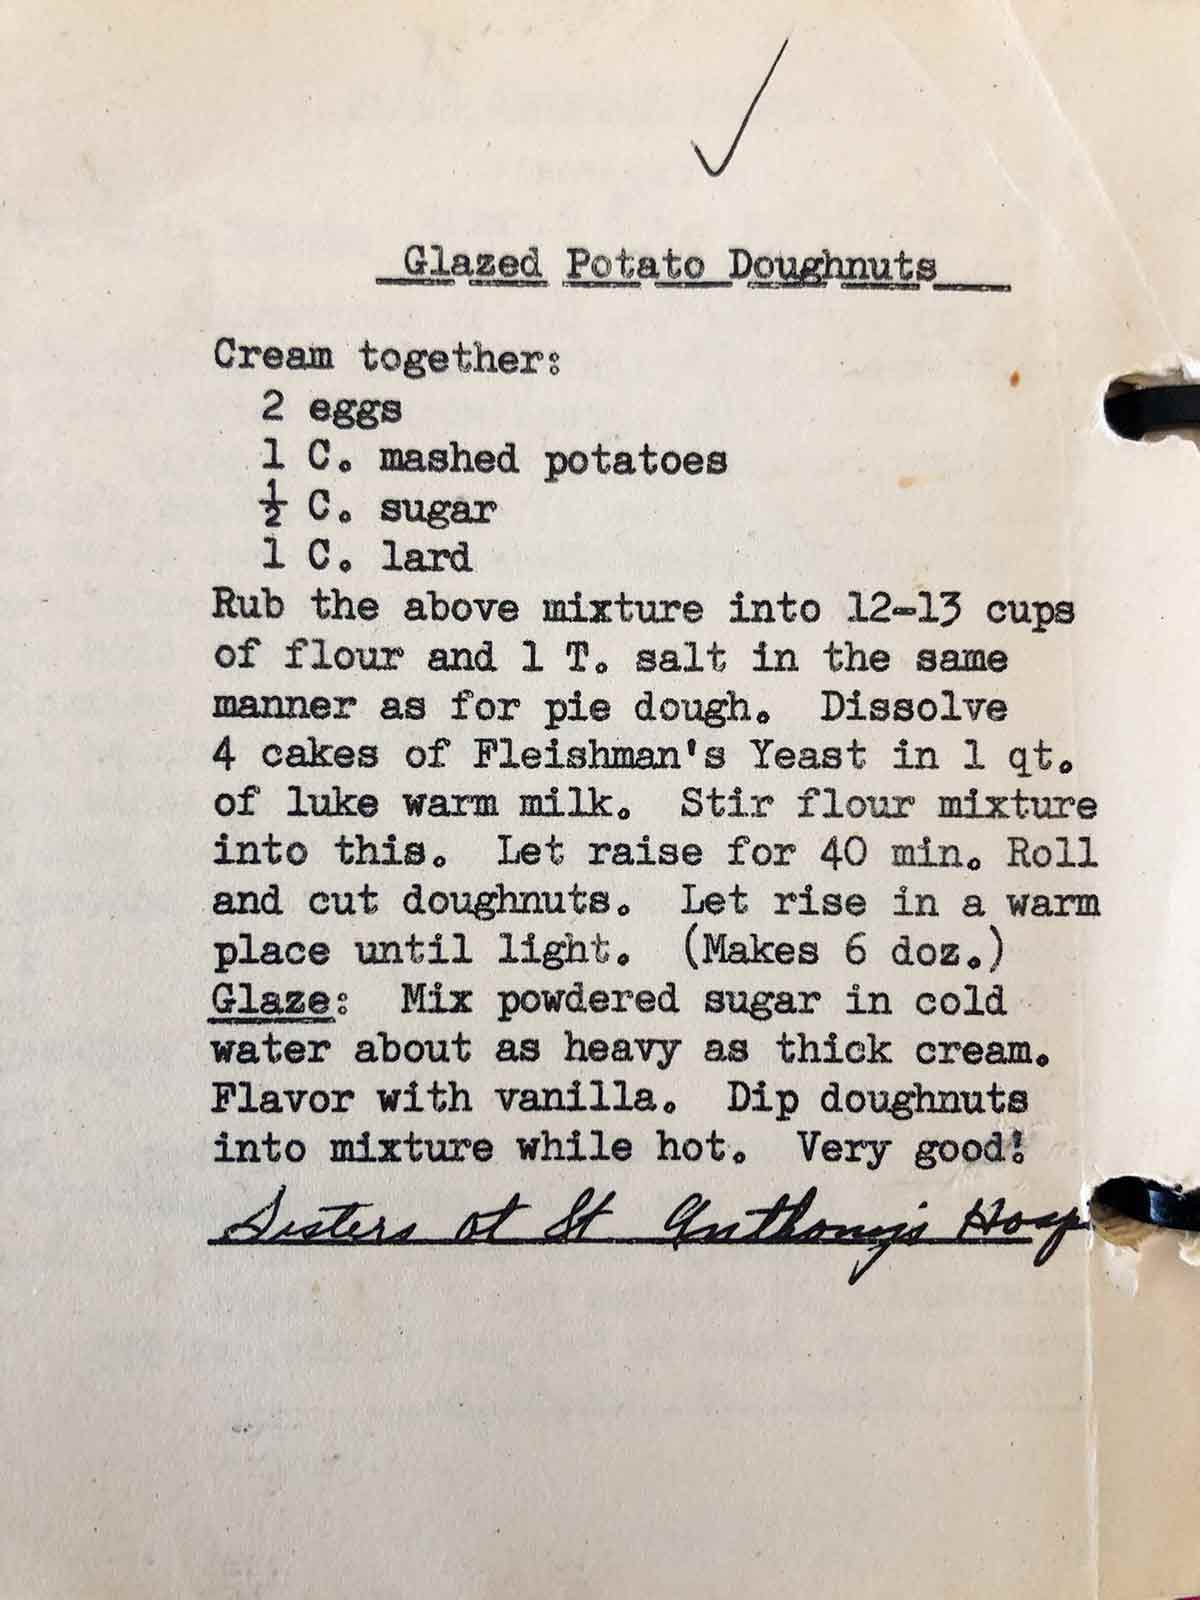 An old typewritten recipe for glazed potato doughnuts as part of the writing, "Comfort Me With Dougnuts".